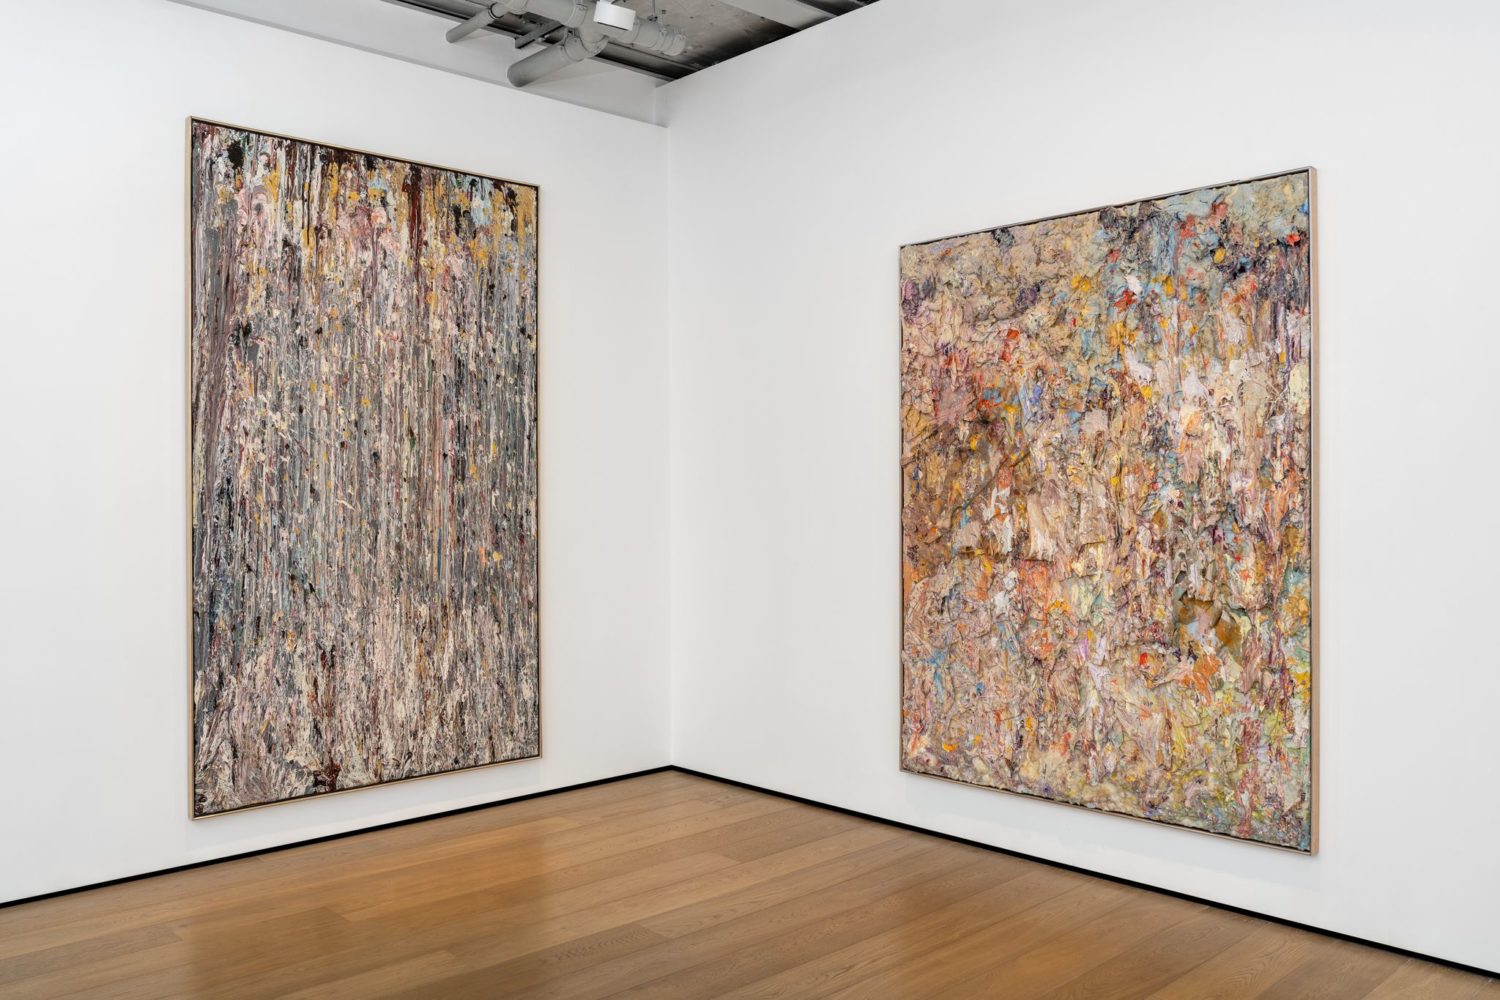 "Larry Poons and Painting: And Epic Journey" at Almine Rech